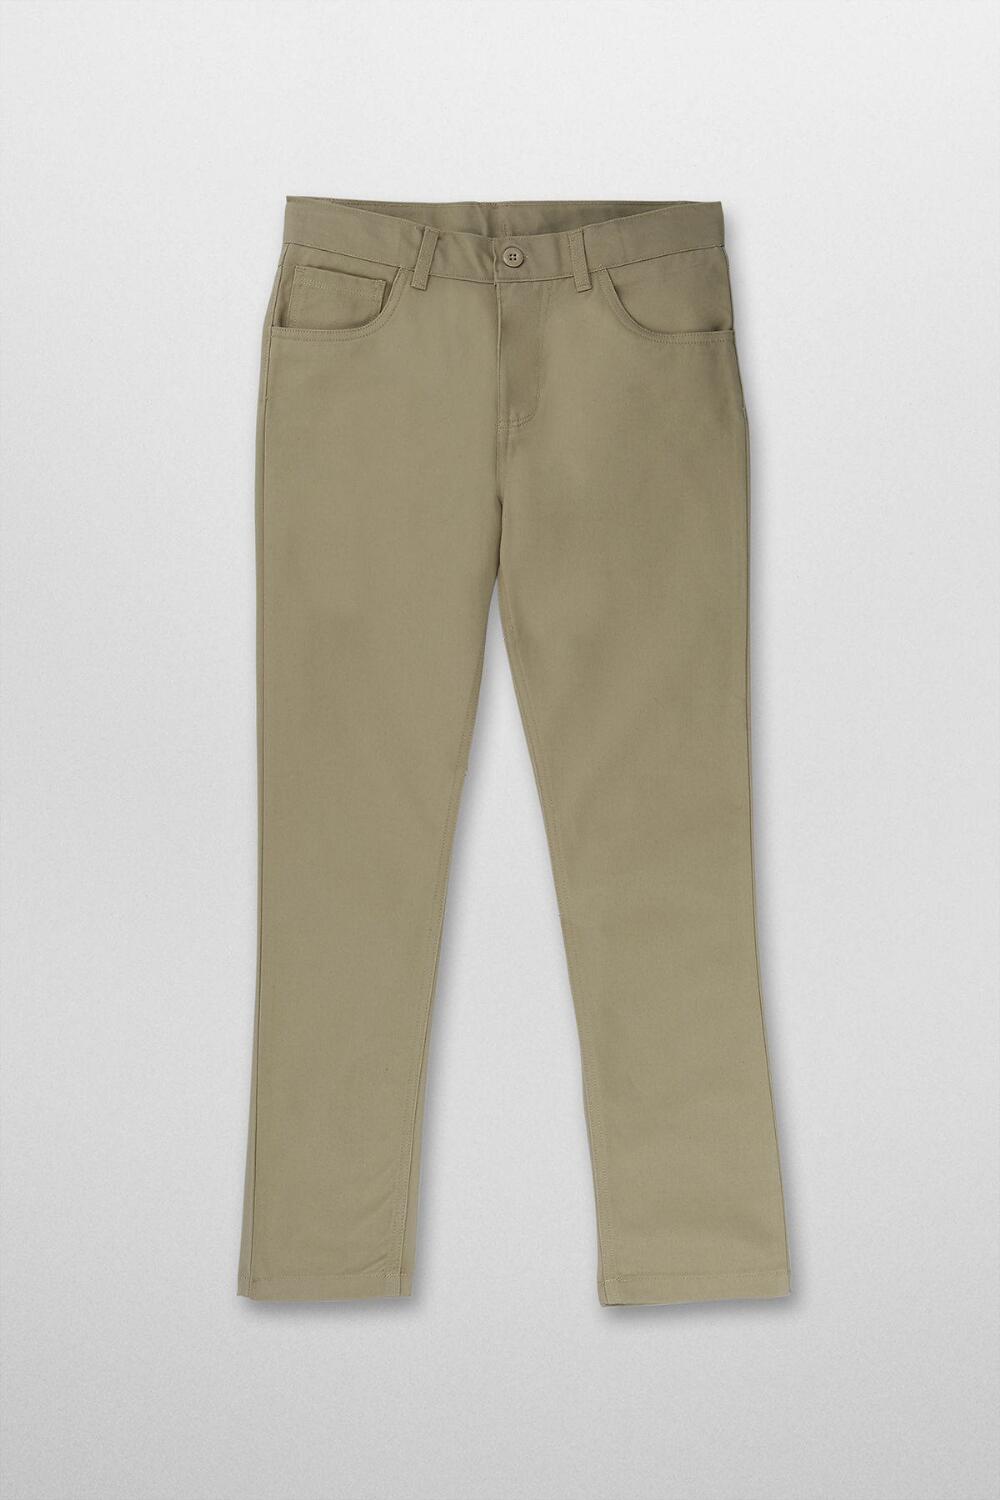 At School by French Toast Slim Fit 5-Pocket Pant